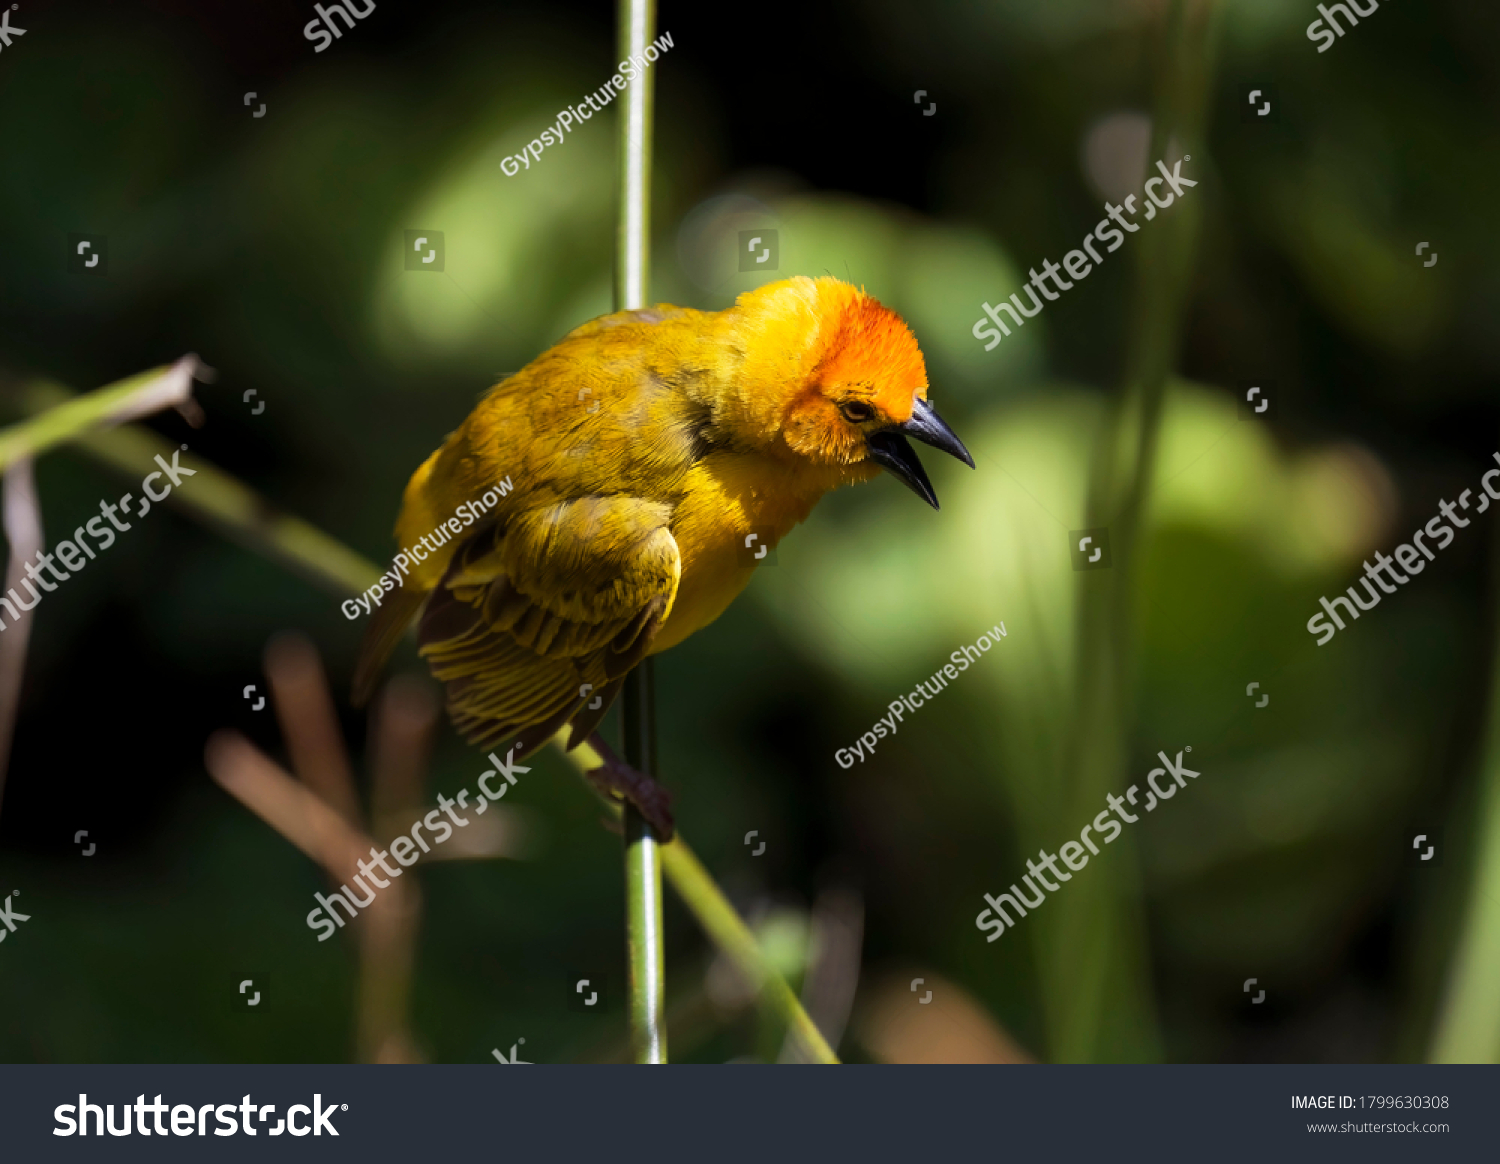 This image shows a perched Taveta Golden Weaver Bird (Ploceus castaneiceps) with it's beak open. #1799630308